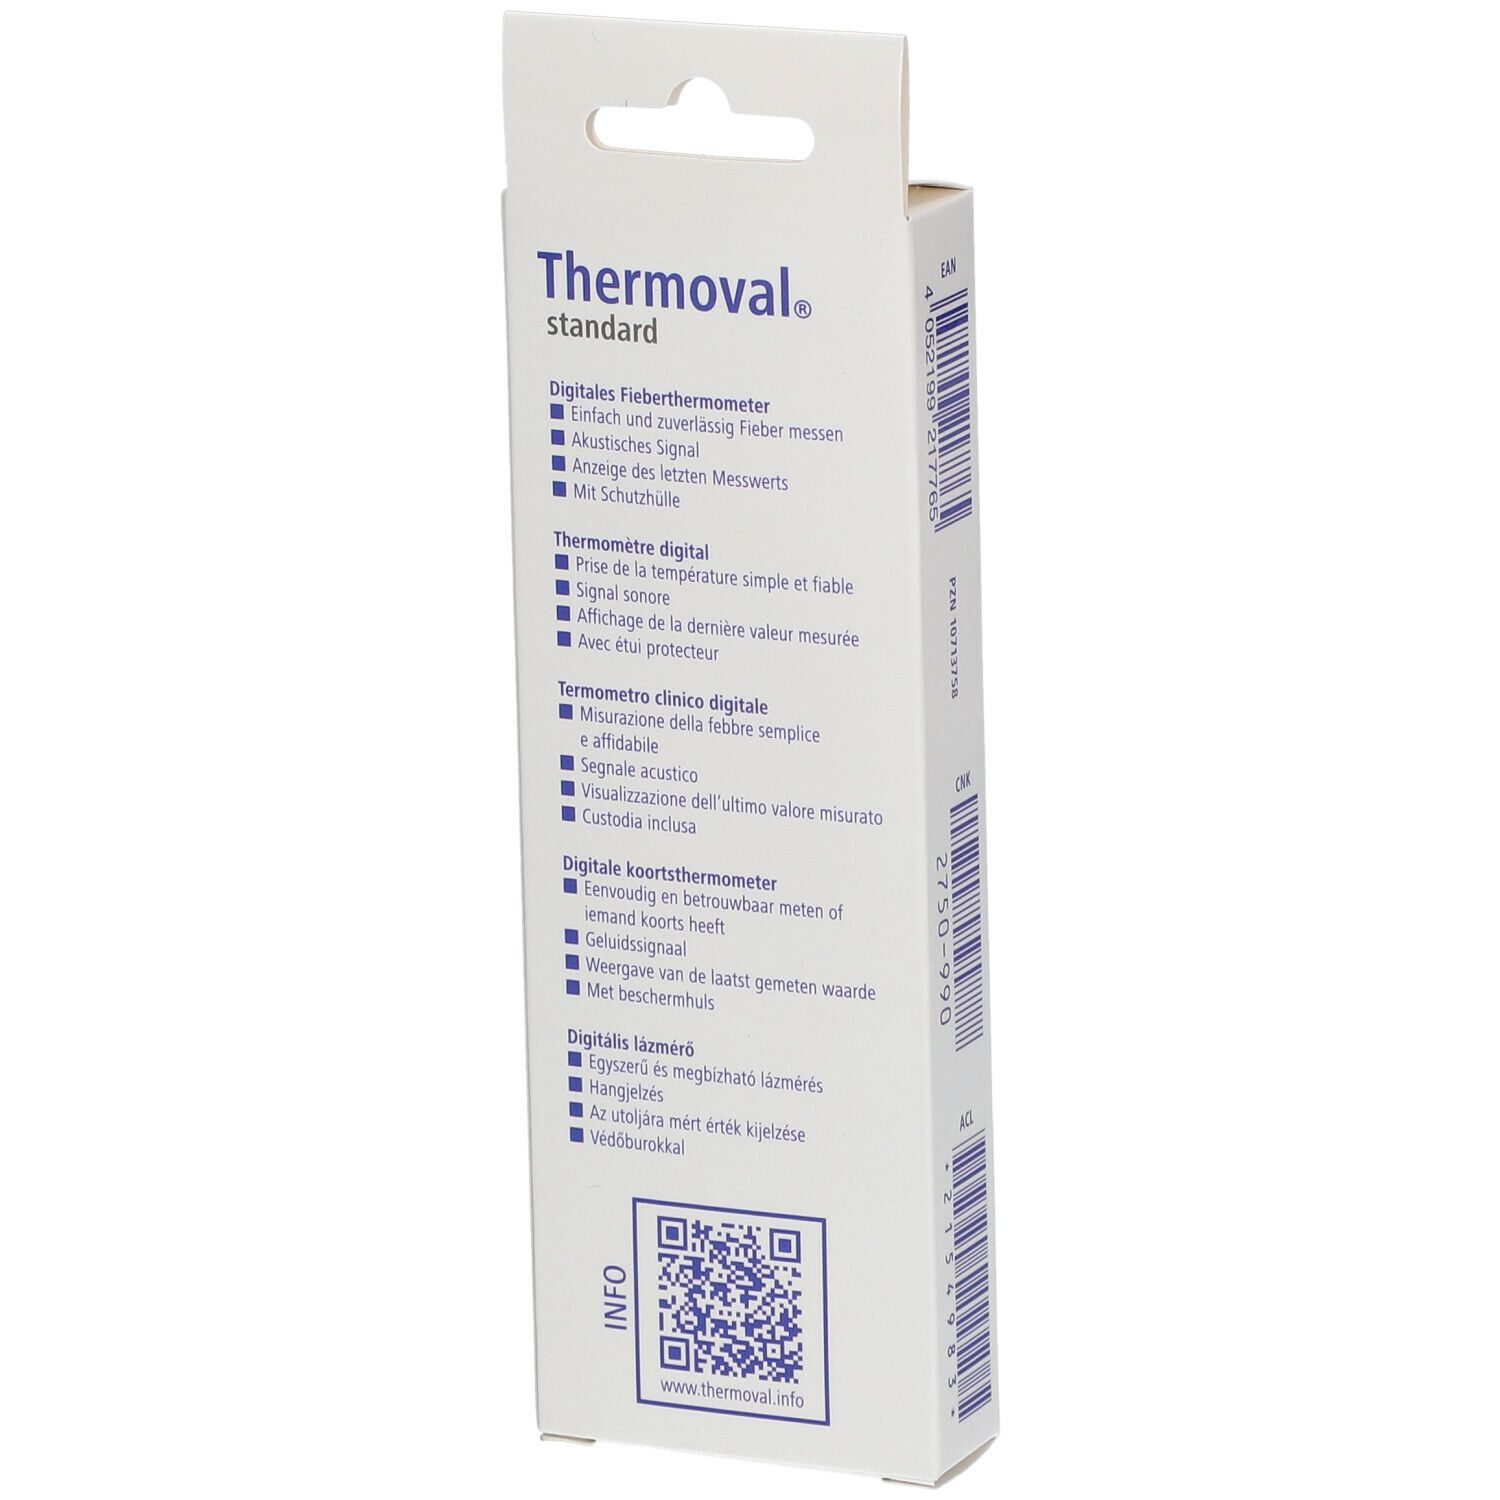 Thermoval® standard